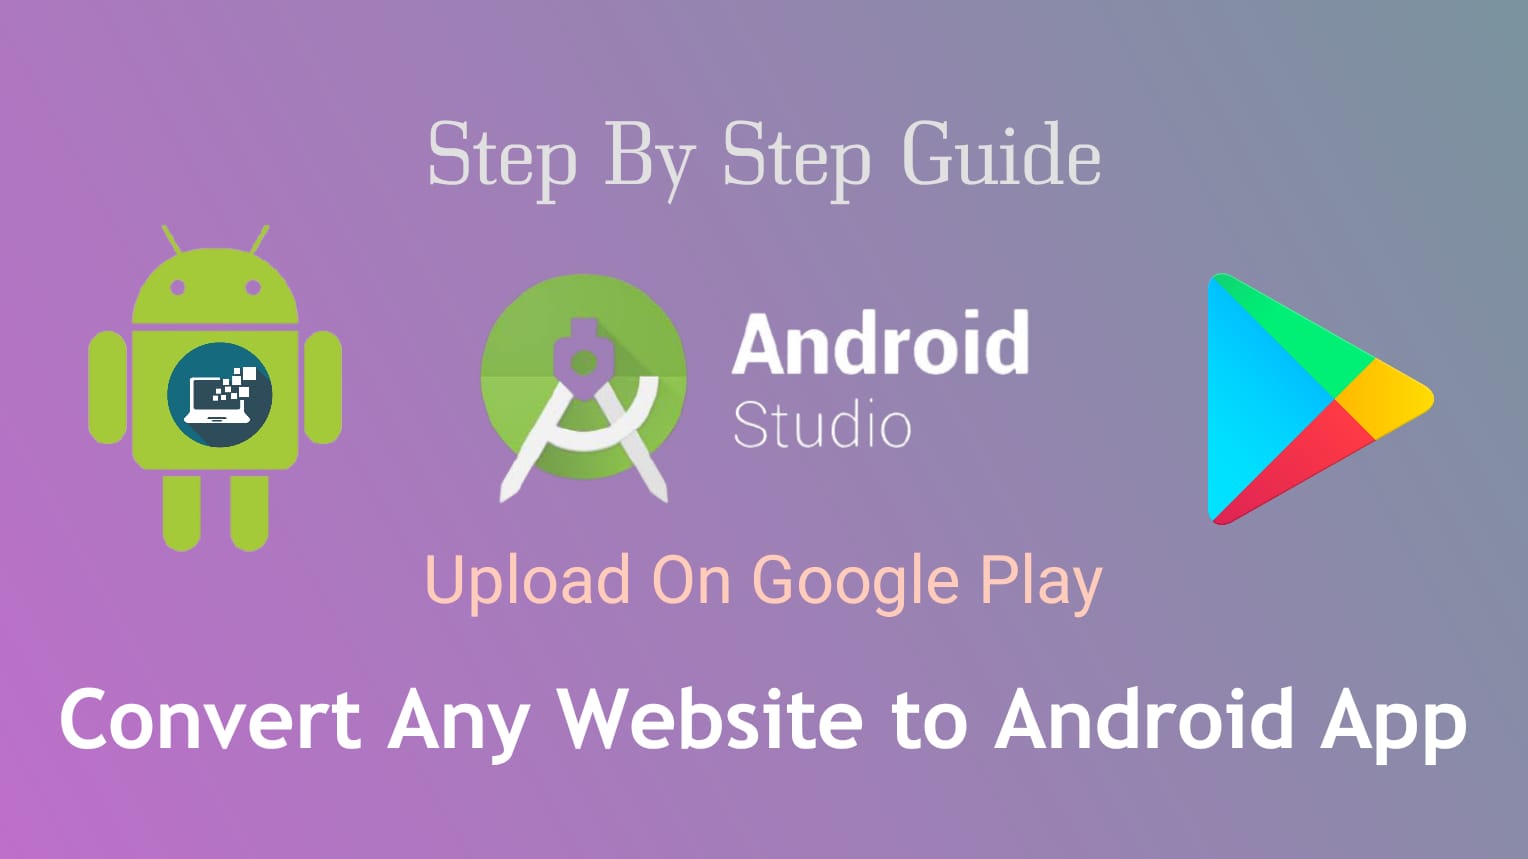 Convert Any Website to Android App using Android Studio